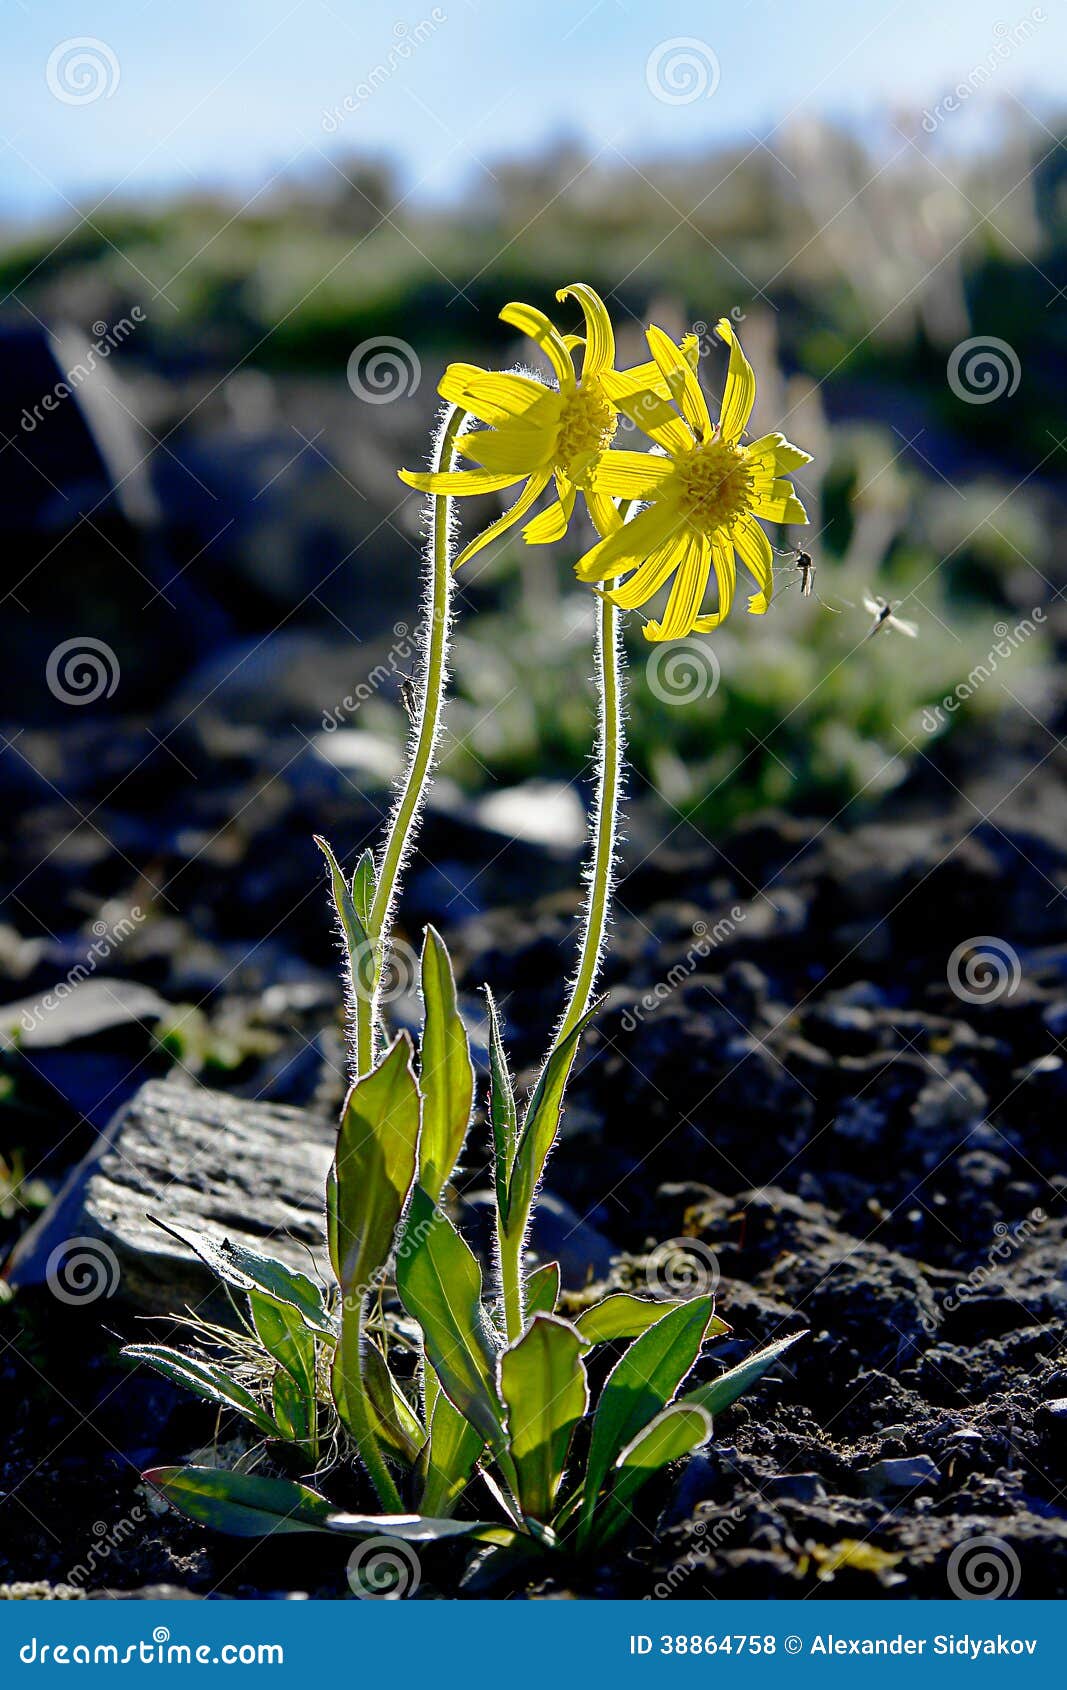 mountain arnica flowers covered tundra.